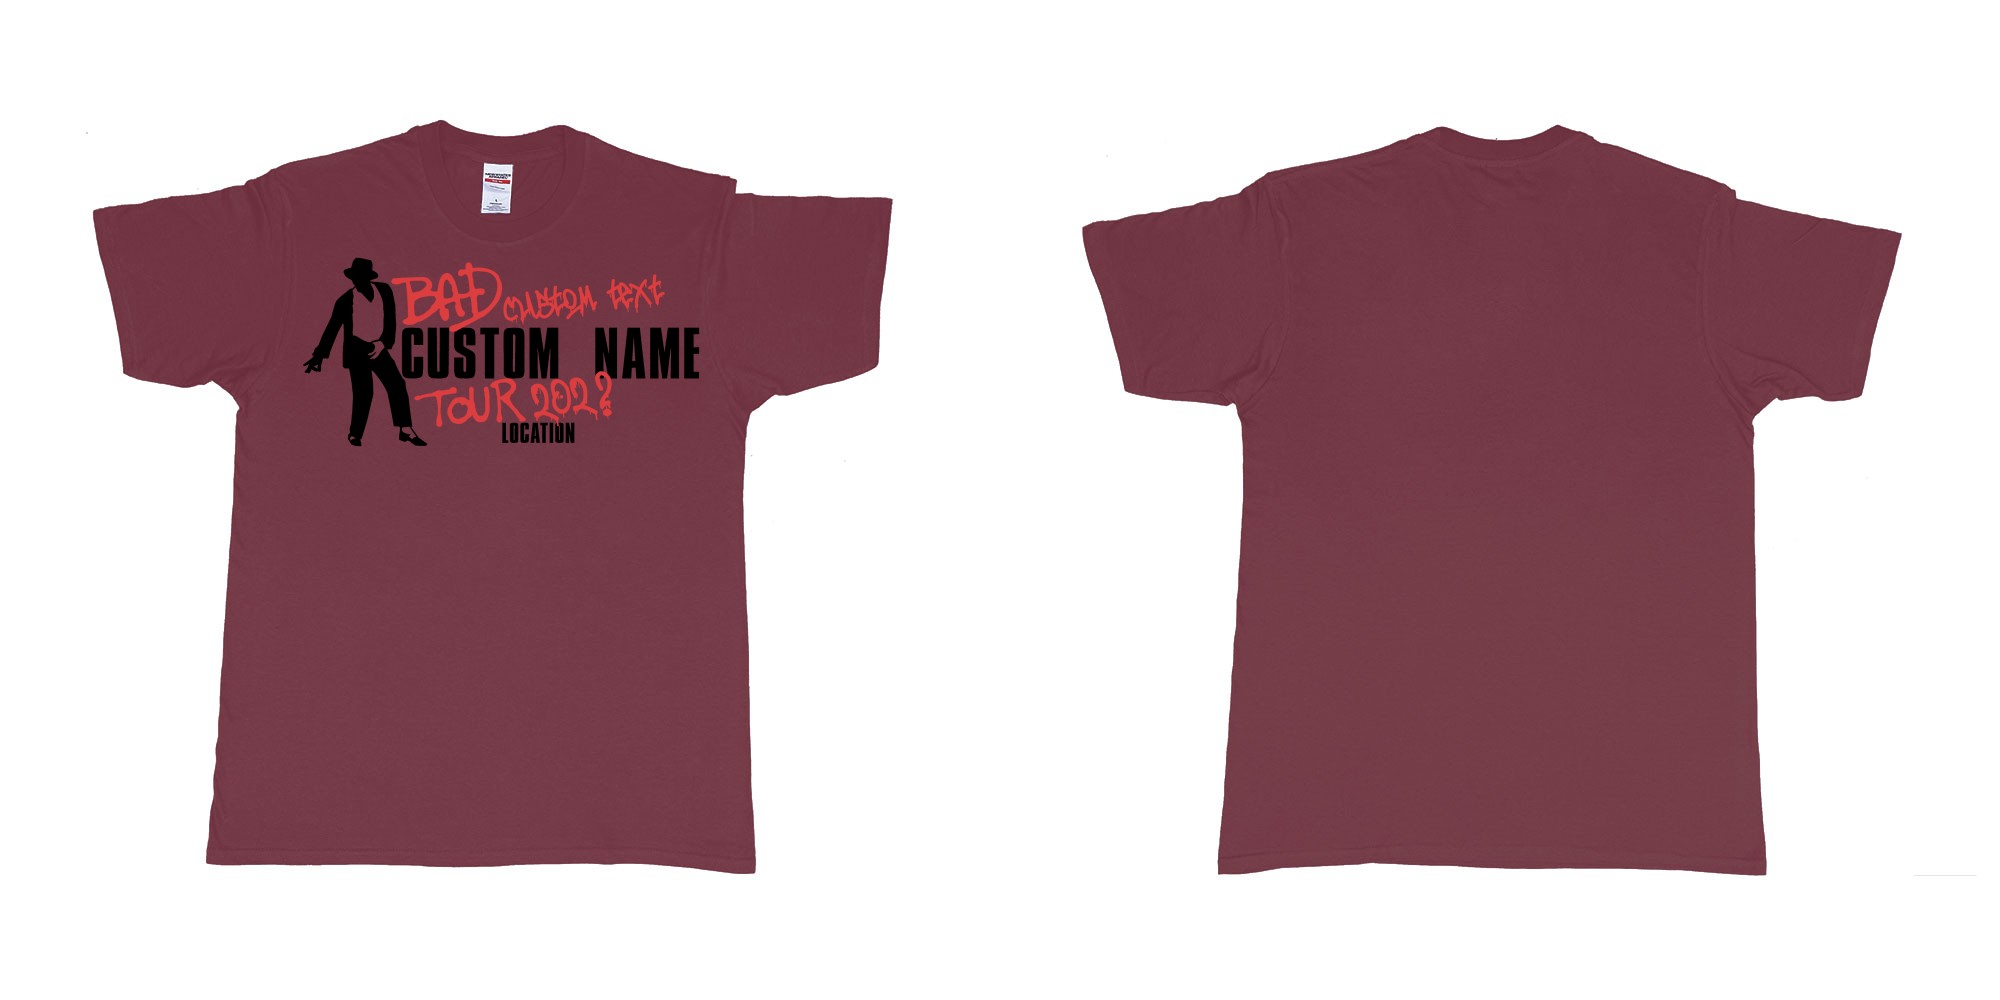 Custom tshirt design michael jackson bad tour custom name year location in fabric color marron choice your own text made in Bali by The Pirate Way